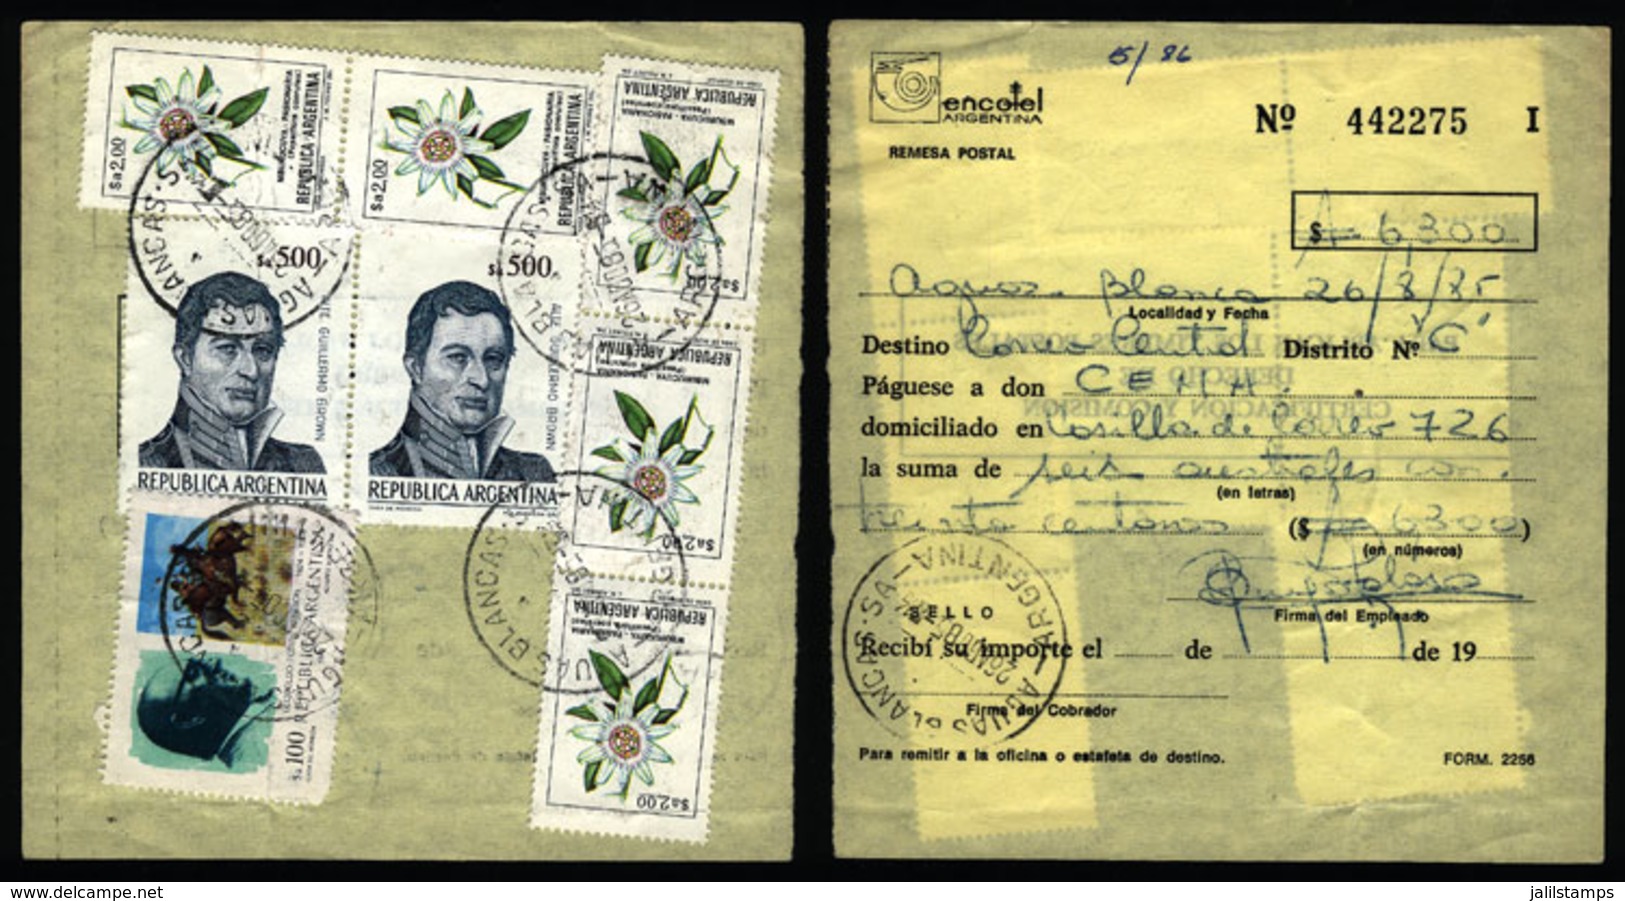 ARGENTINA: Postal Money Order Sent On 26/AU/1985, With Postmark Of AGUAS BLANCAS (Salta) And Inflation Postage Of  $a111 - Covers & Documents